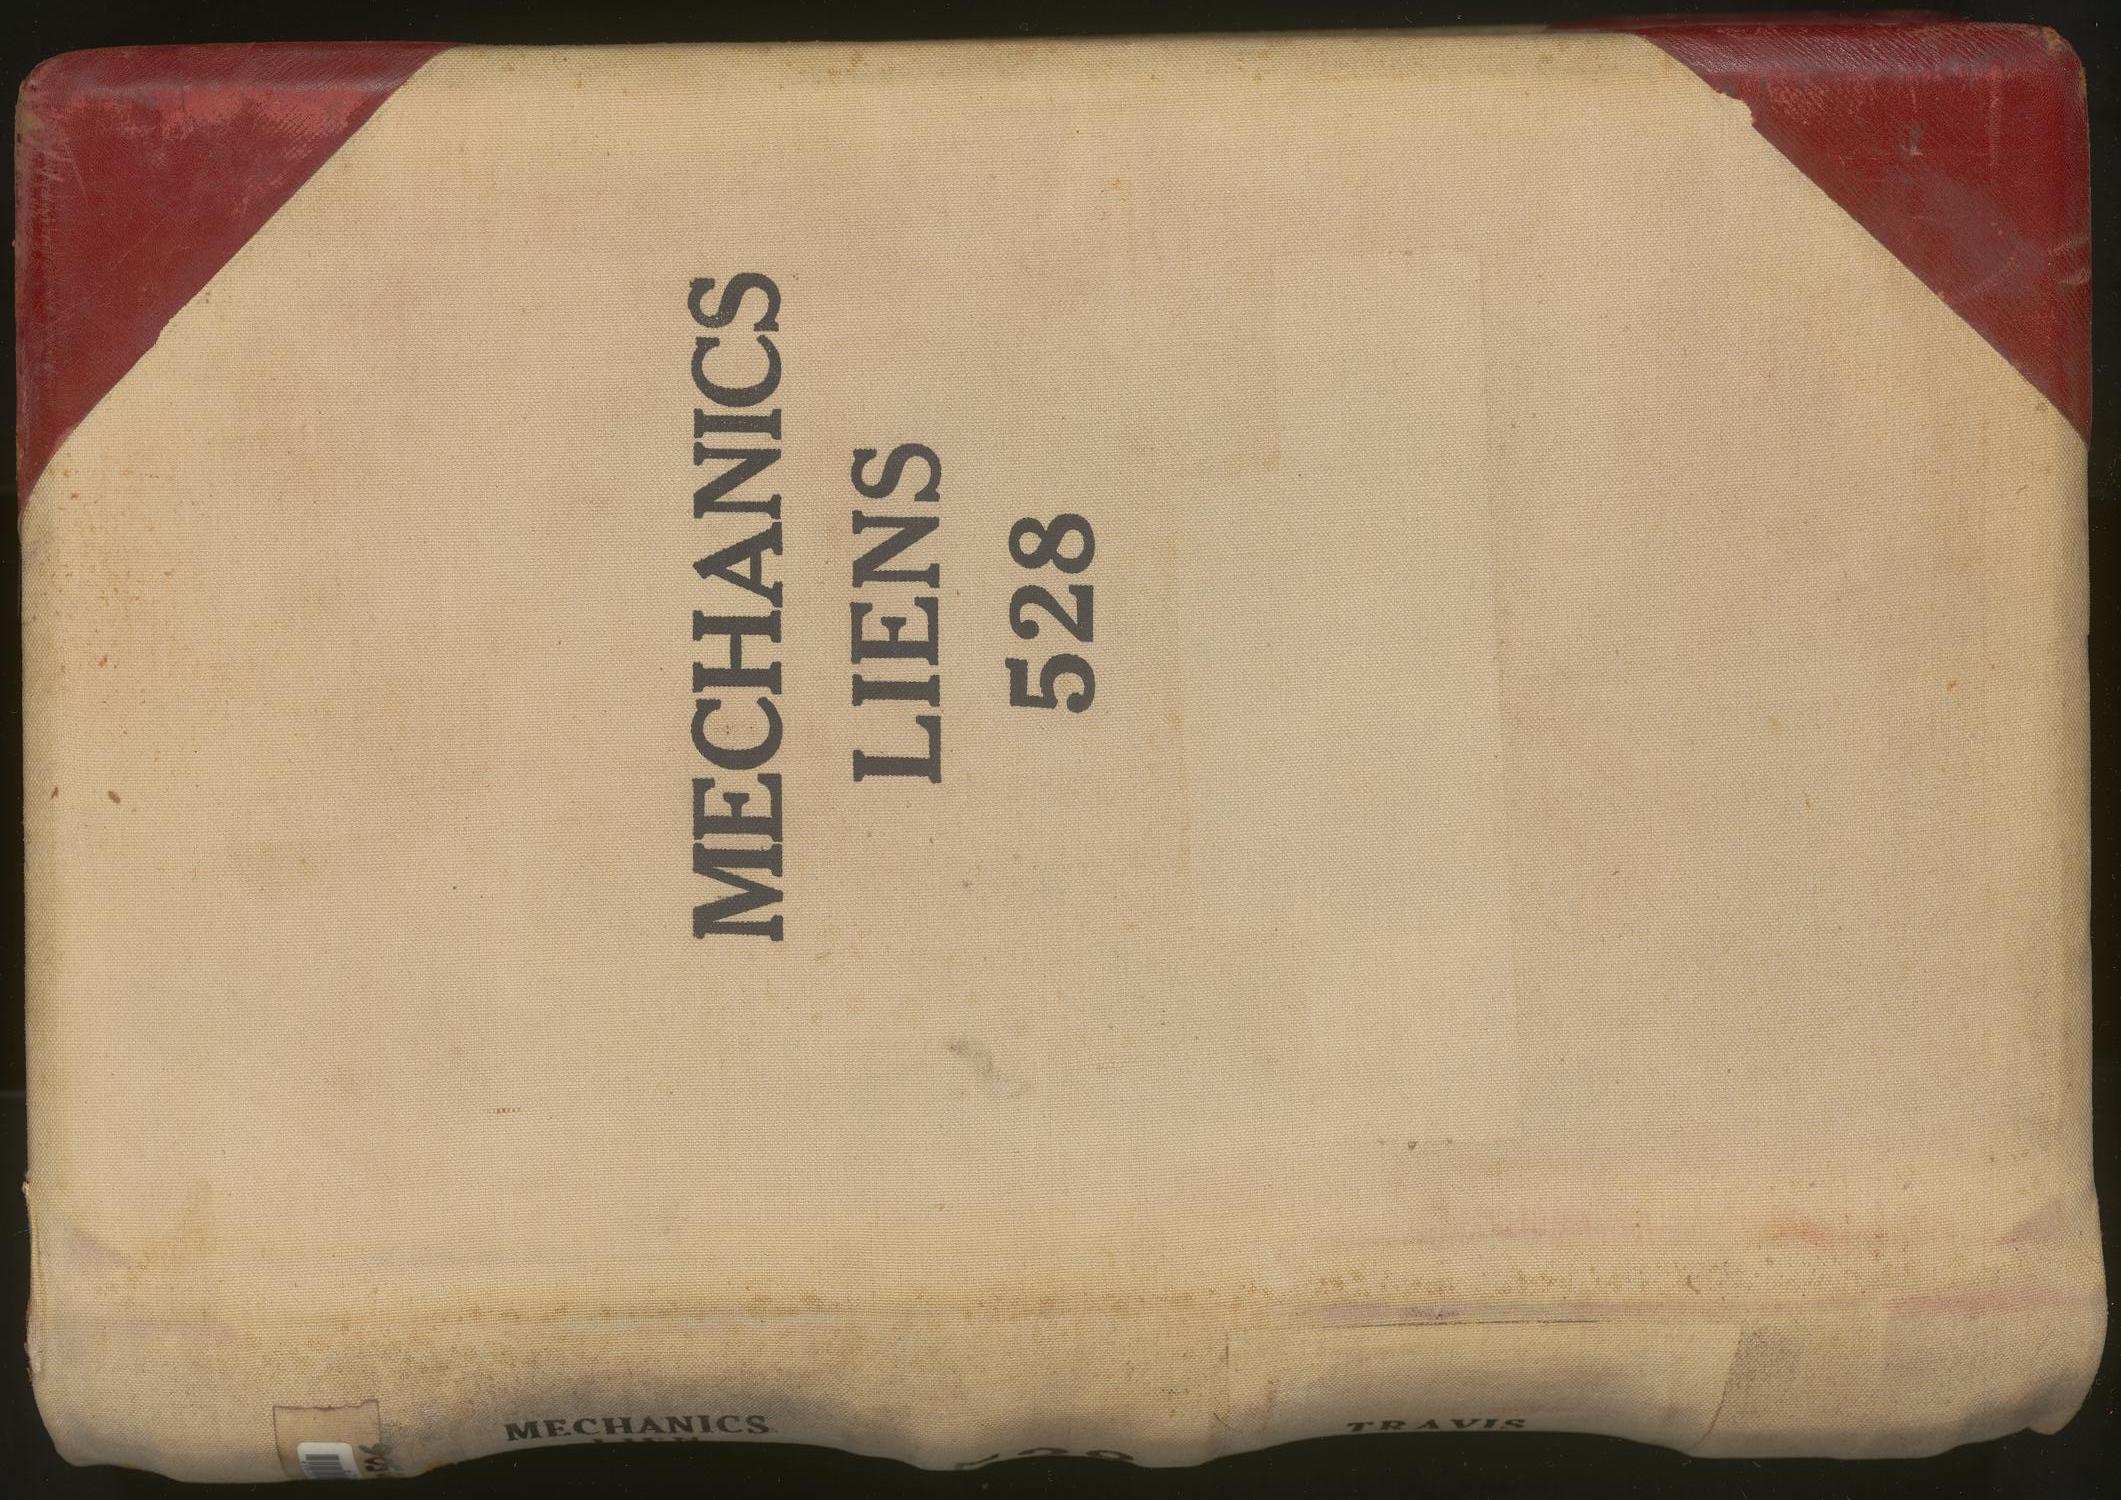 Travis County Deed Records: Deed Record 528 - Mechanics Liens
                                                
                                                    Front Cover
                                                